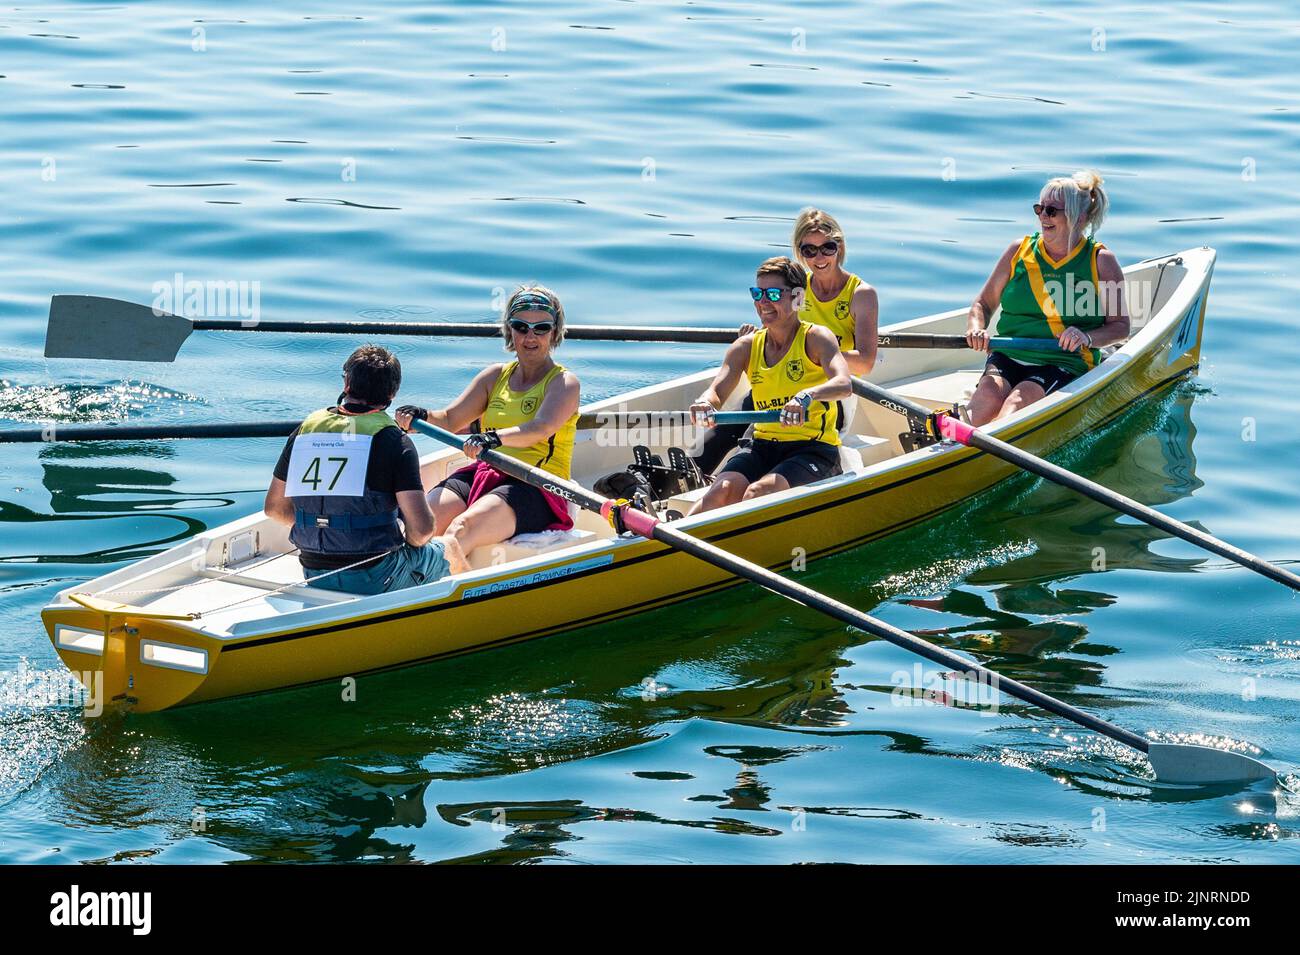 Schull, West Cork, Ireland. 13th Aug, 2022. The 2022 Irish Coastal Rowing Championships is taking place this weekend in Schull, West Cork. A total of 290 crews from different clubs are taking part in the event which finishes Sunday evening. Ring Rowing Club Ladies crew prepares to race. Credit: AG News/Alamy Live News Stock Photo